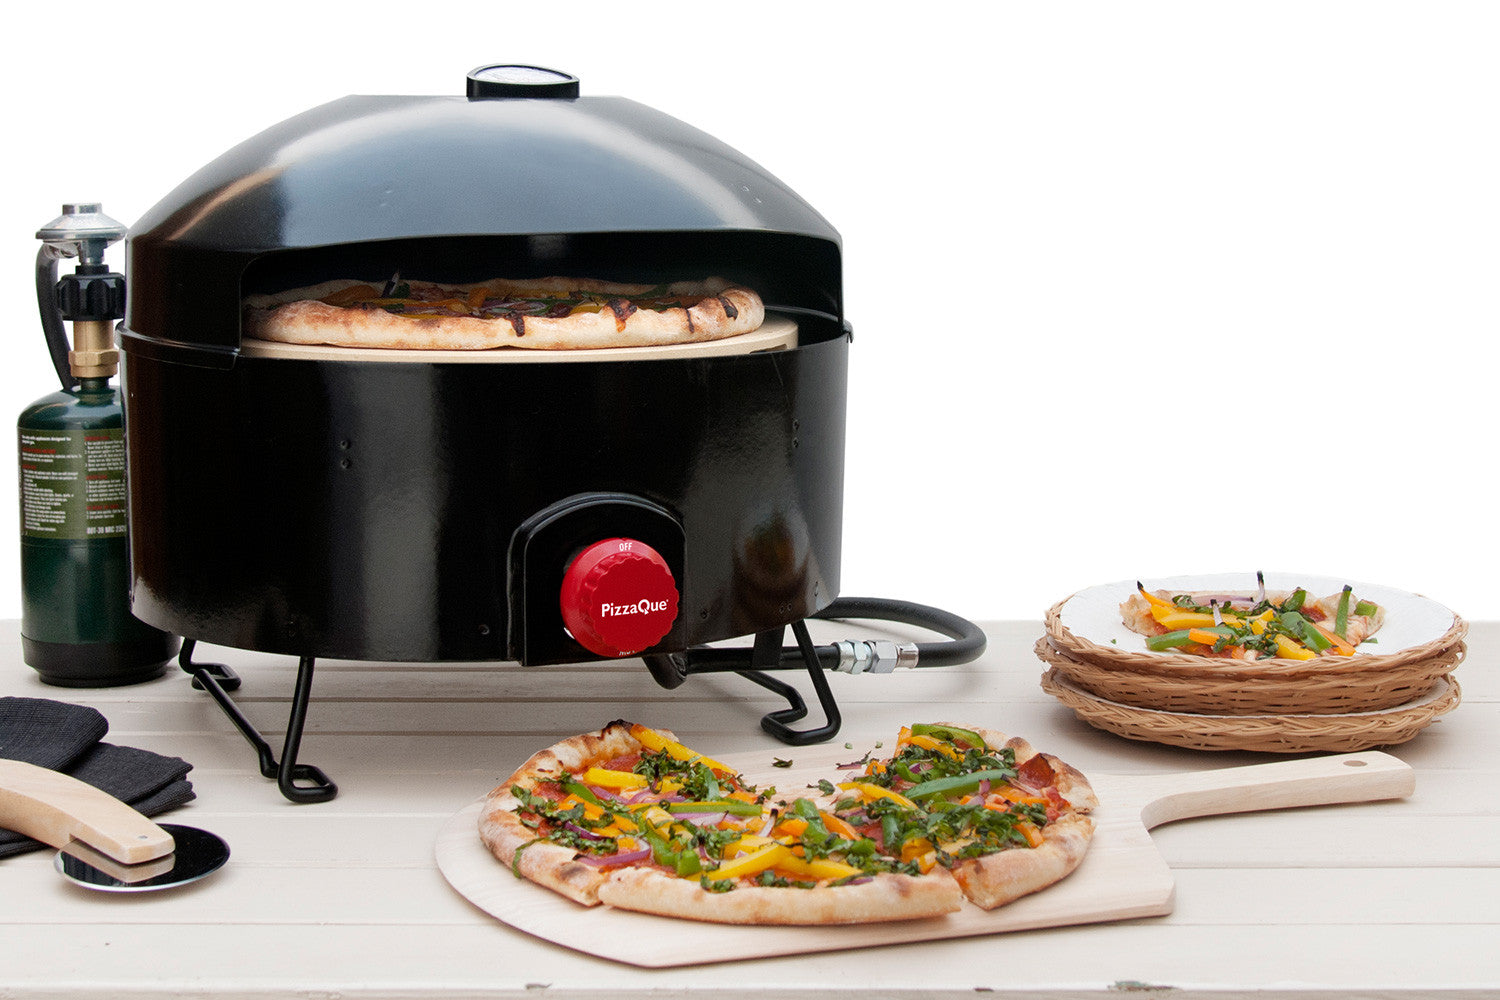 Finished Pizzas with a PizzaQue Portable Pizza Oven